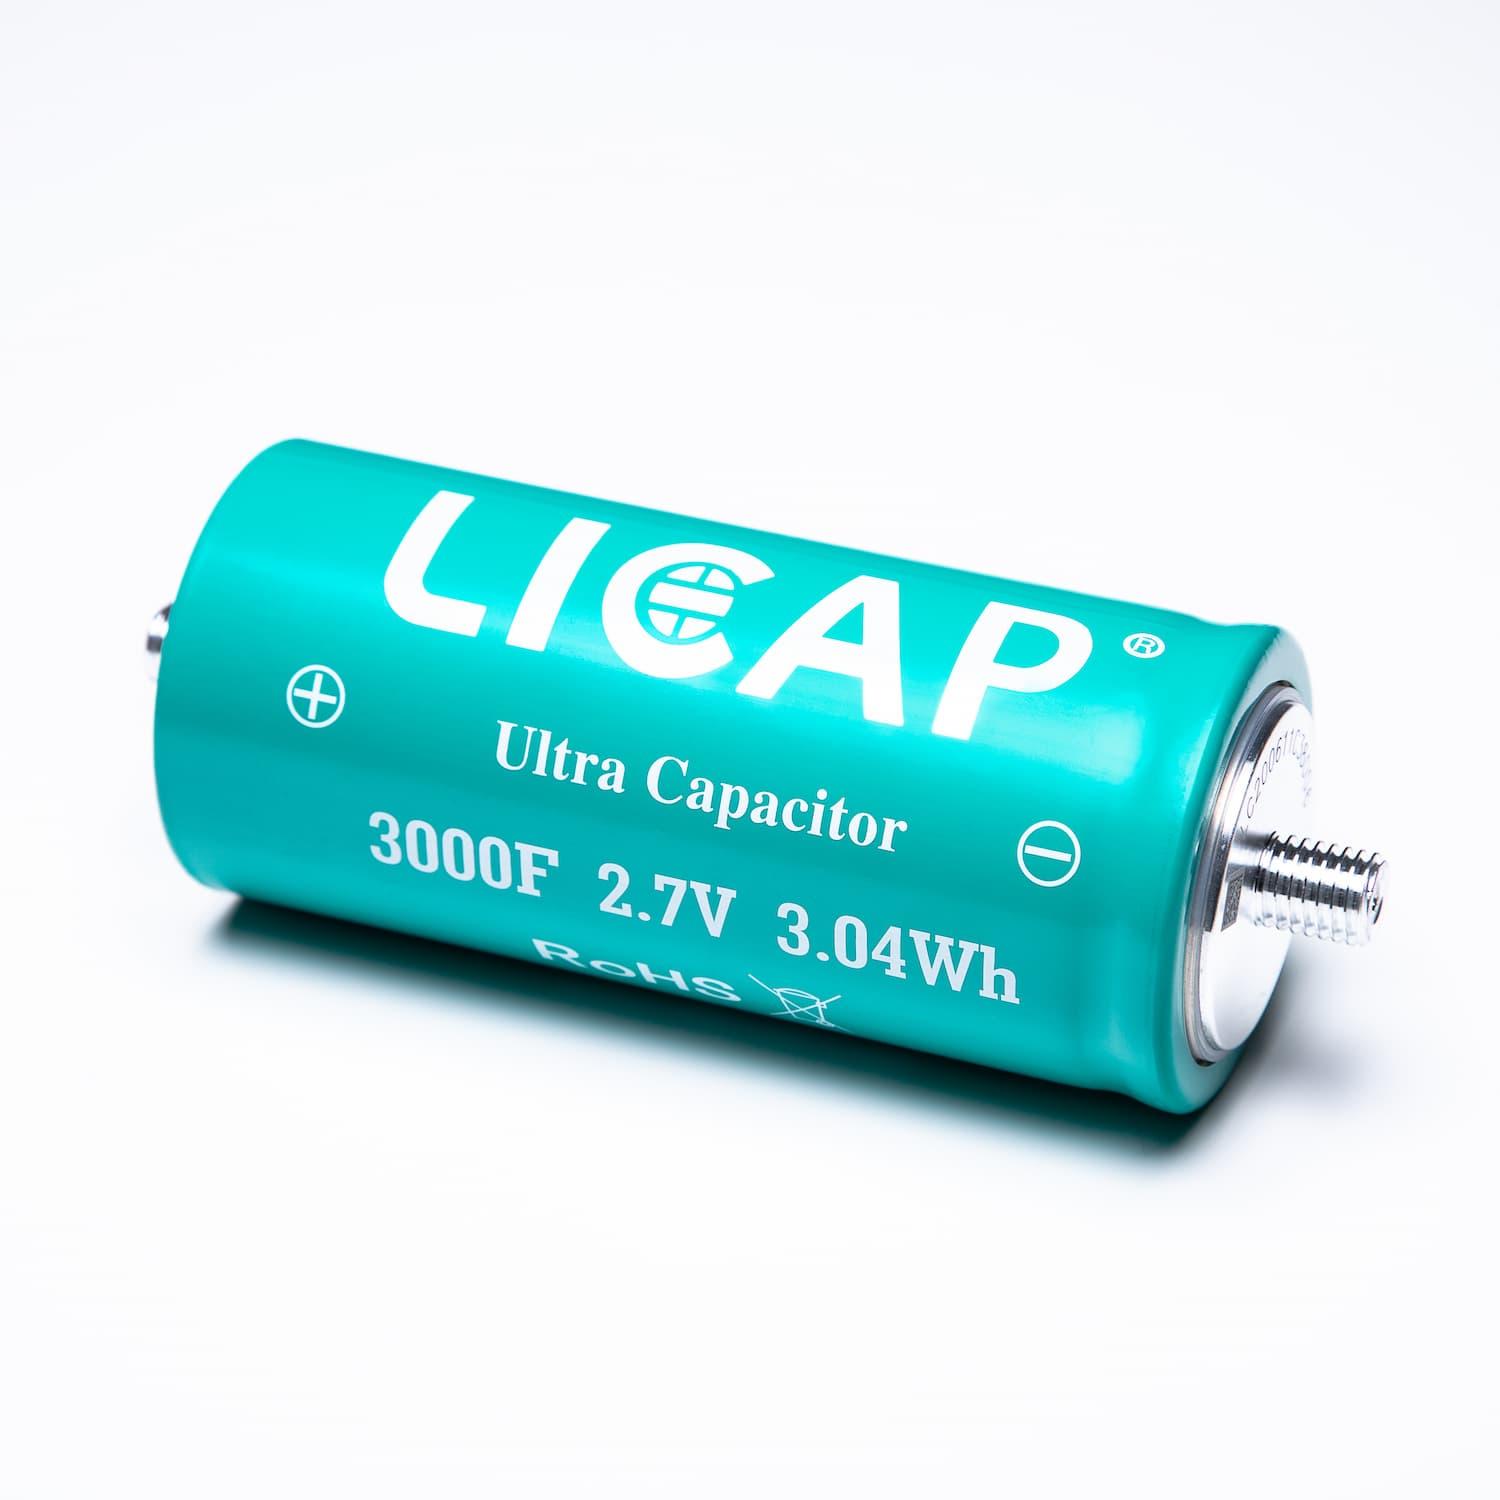 Product 2.7V, 3000F Ultracapacitor Cell LICAP Technologies, Inc. - Ultracapacitors, Dry Electrode Technology image